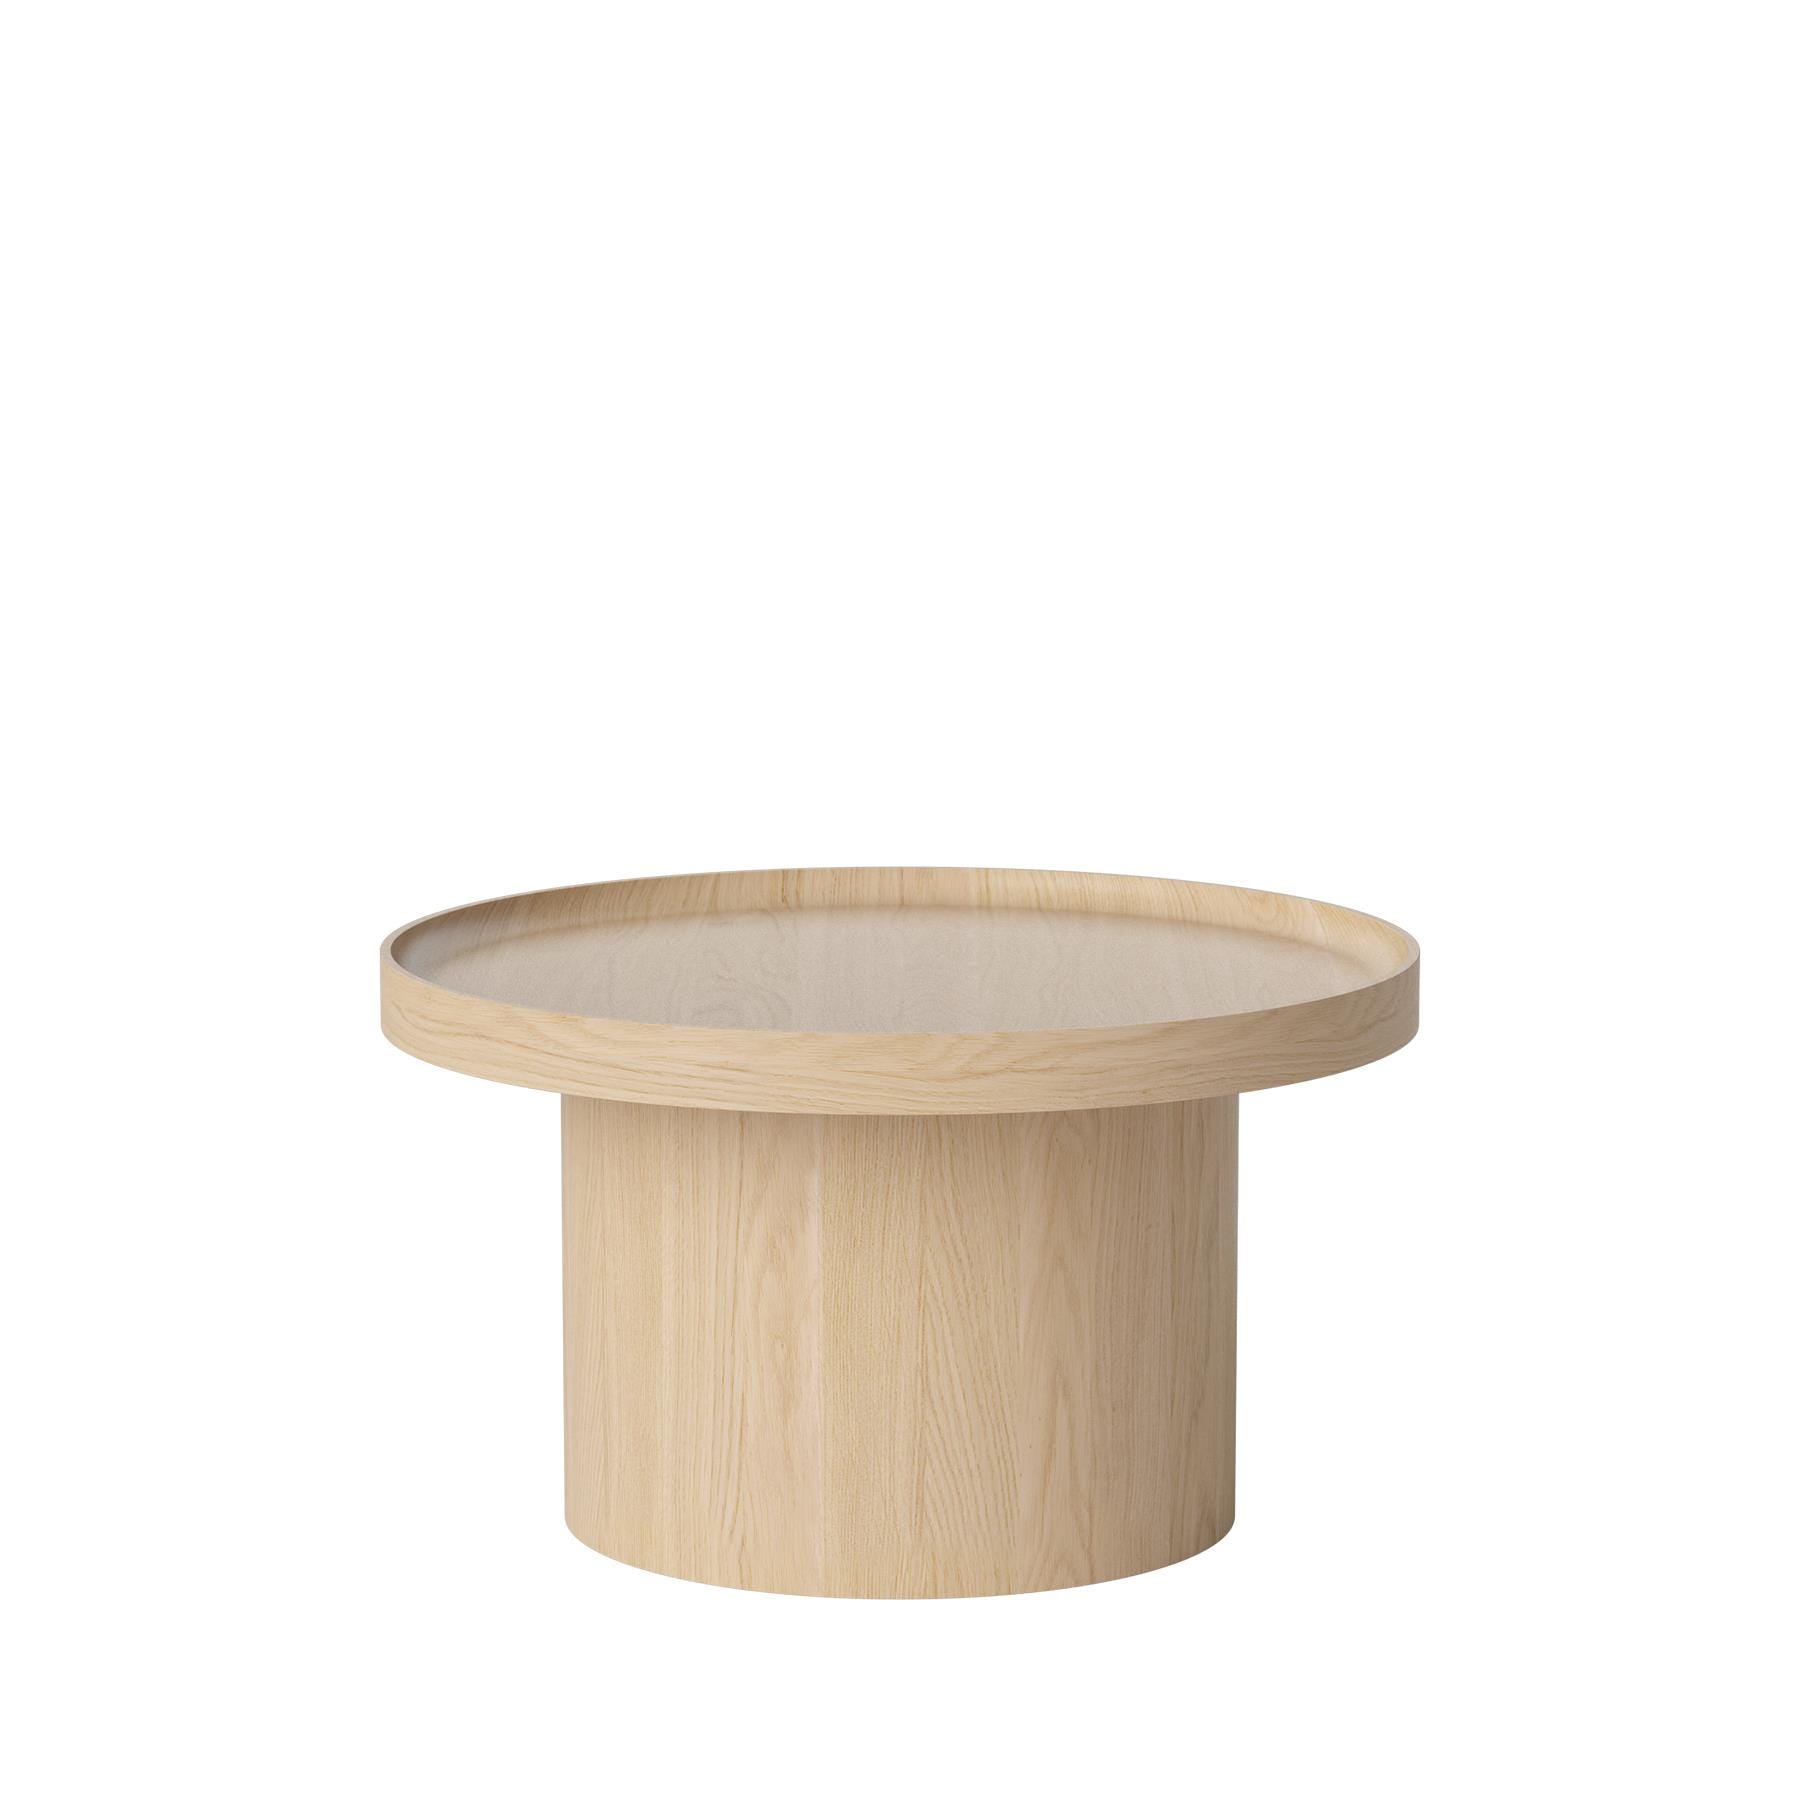 Bolia Plateau Coffee Table Medium White Lacquered Oak Light Wood Designer Furniture From Holloways Of Ludlow